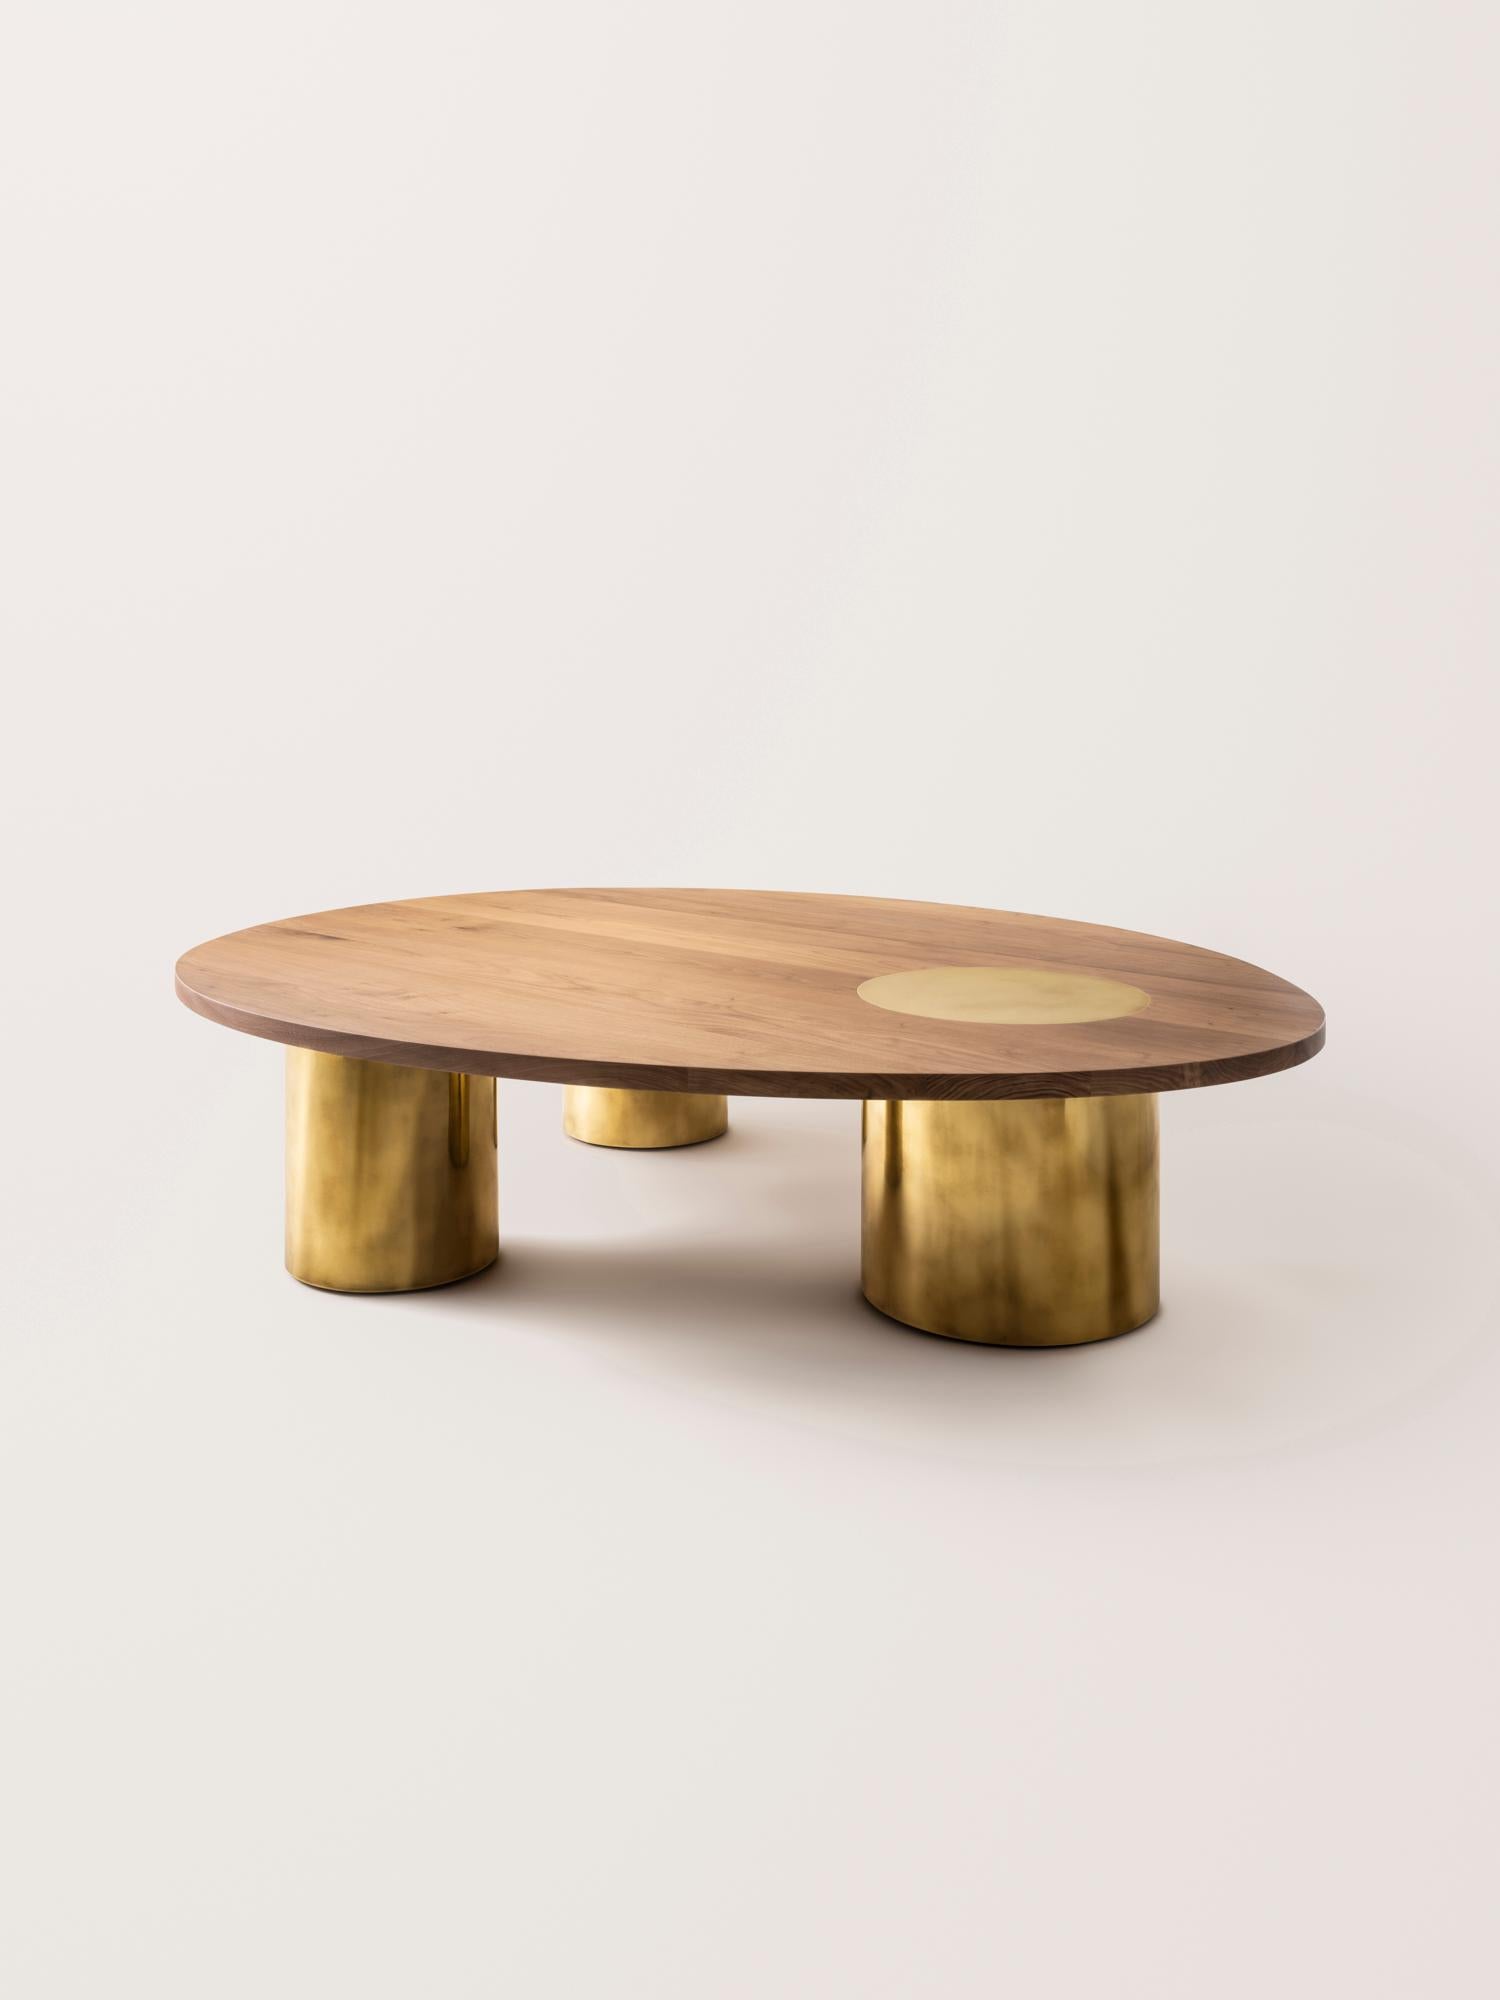 Inspired by the form and function of grain silos, the sculptural Silo Coffee Tables feature solid wood and hand-finished brass or stainless steel wrapped legs. The coffee tables are available in two height options and four sizes to allow for various